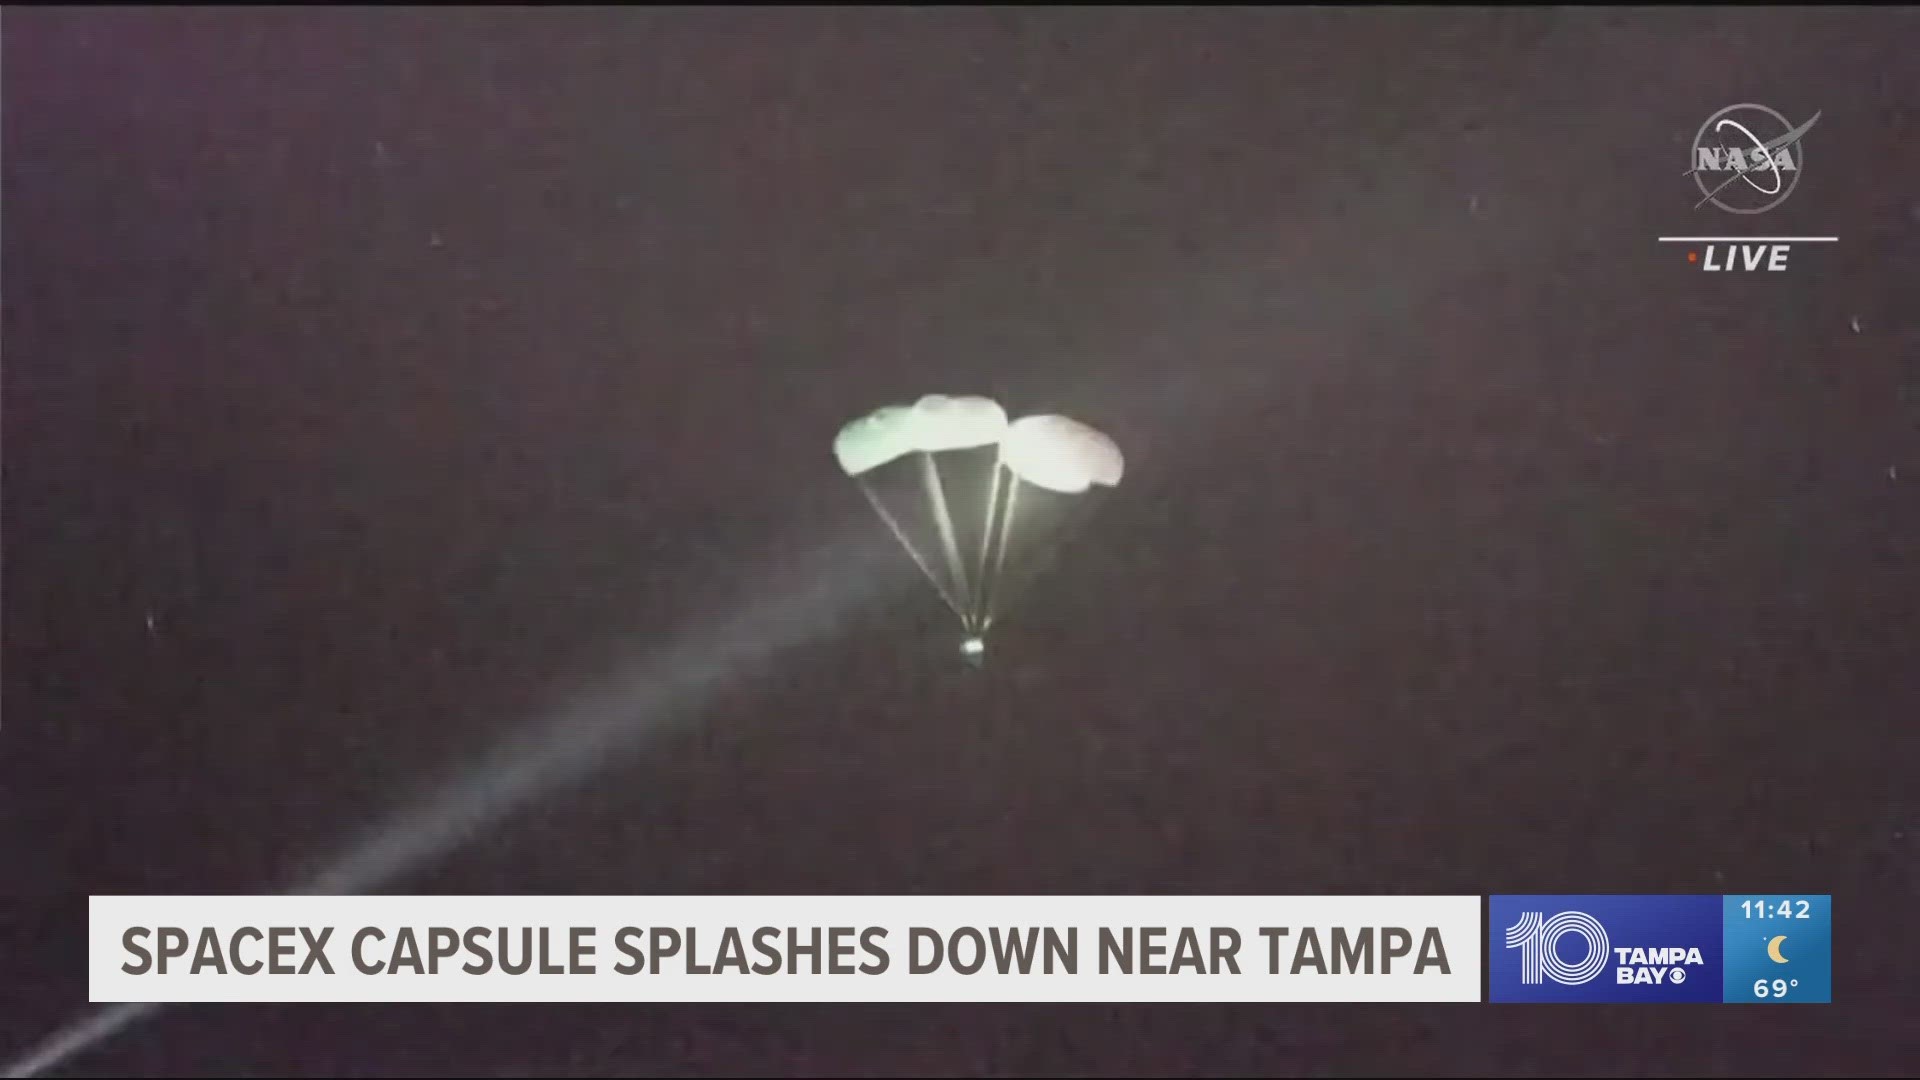 Their capsule splashed down in the Gulf of Mexico just off the Florida coast near Tampa.